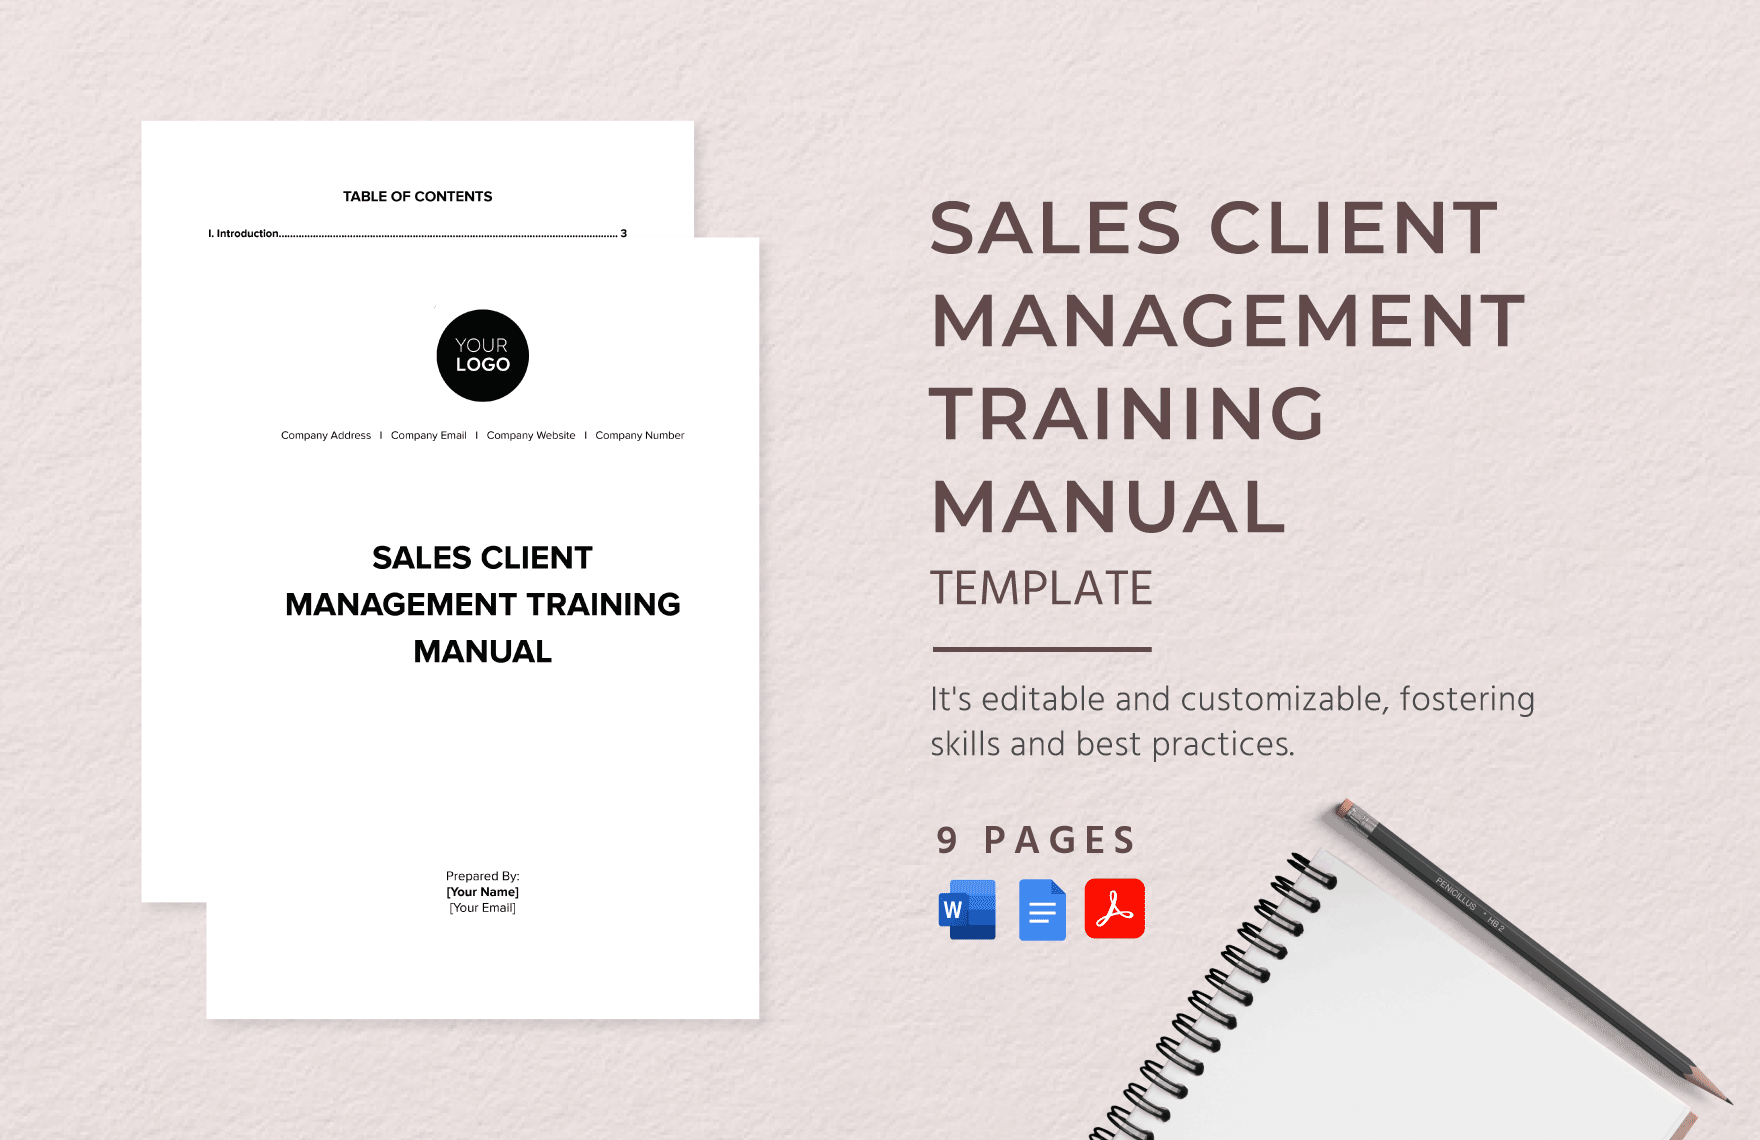 Sales Client Management Training Manual Template in Word, Google Docs, PDF